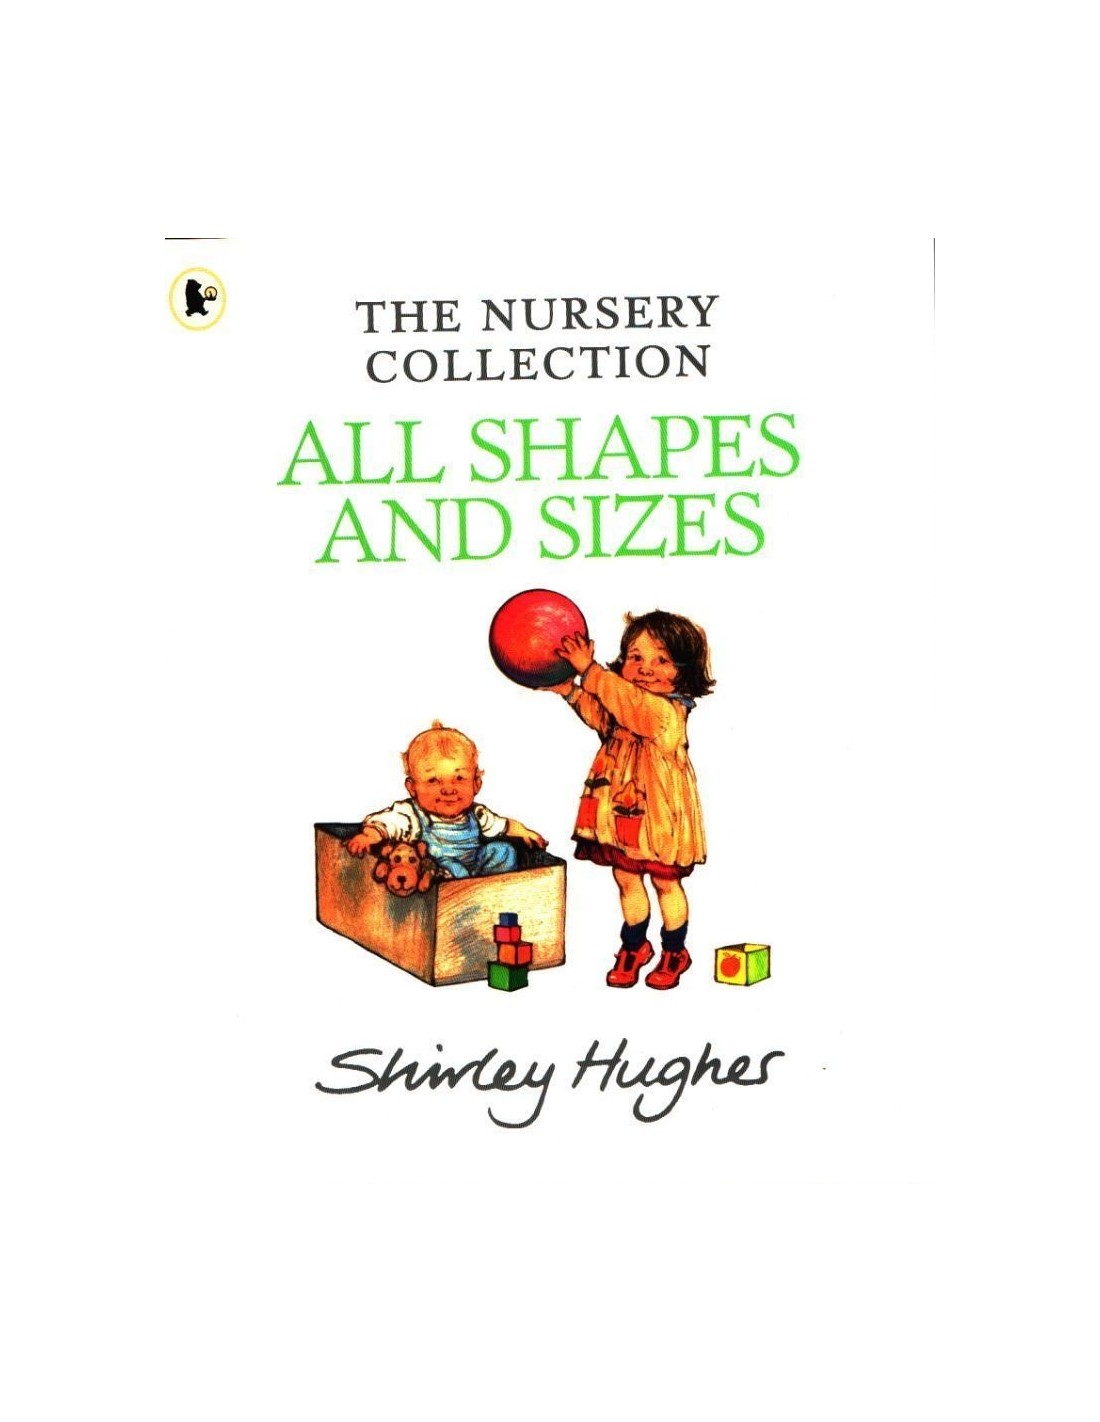 THE NURSERY COLLECTION: All Shapes and Sizes